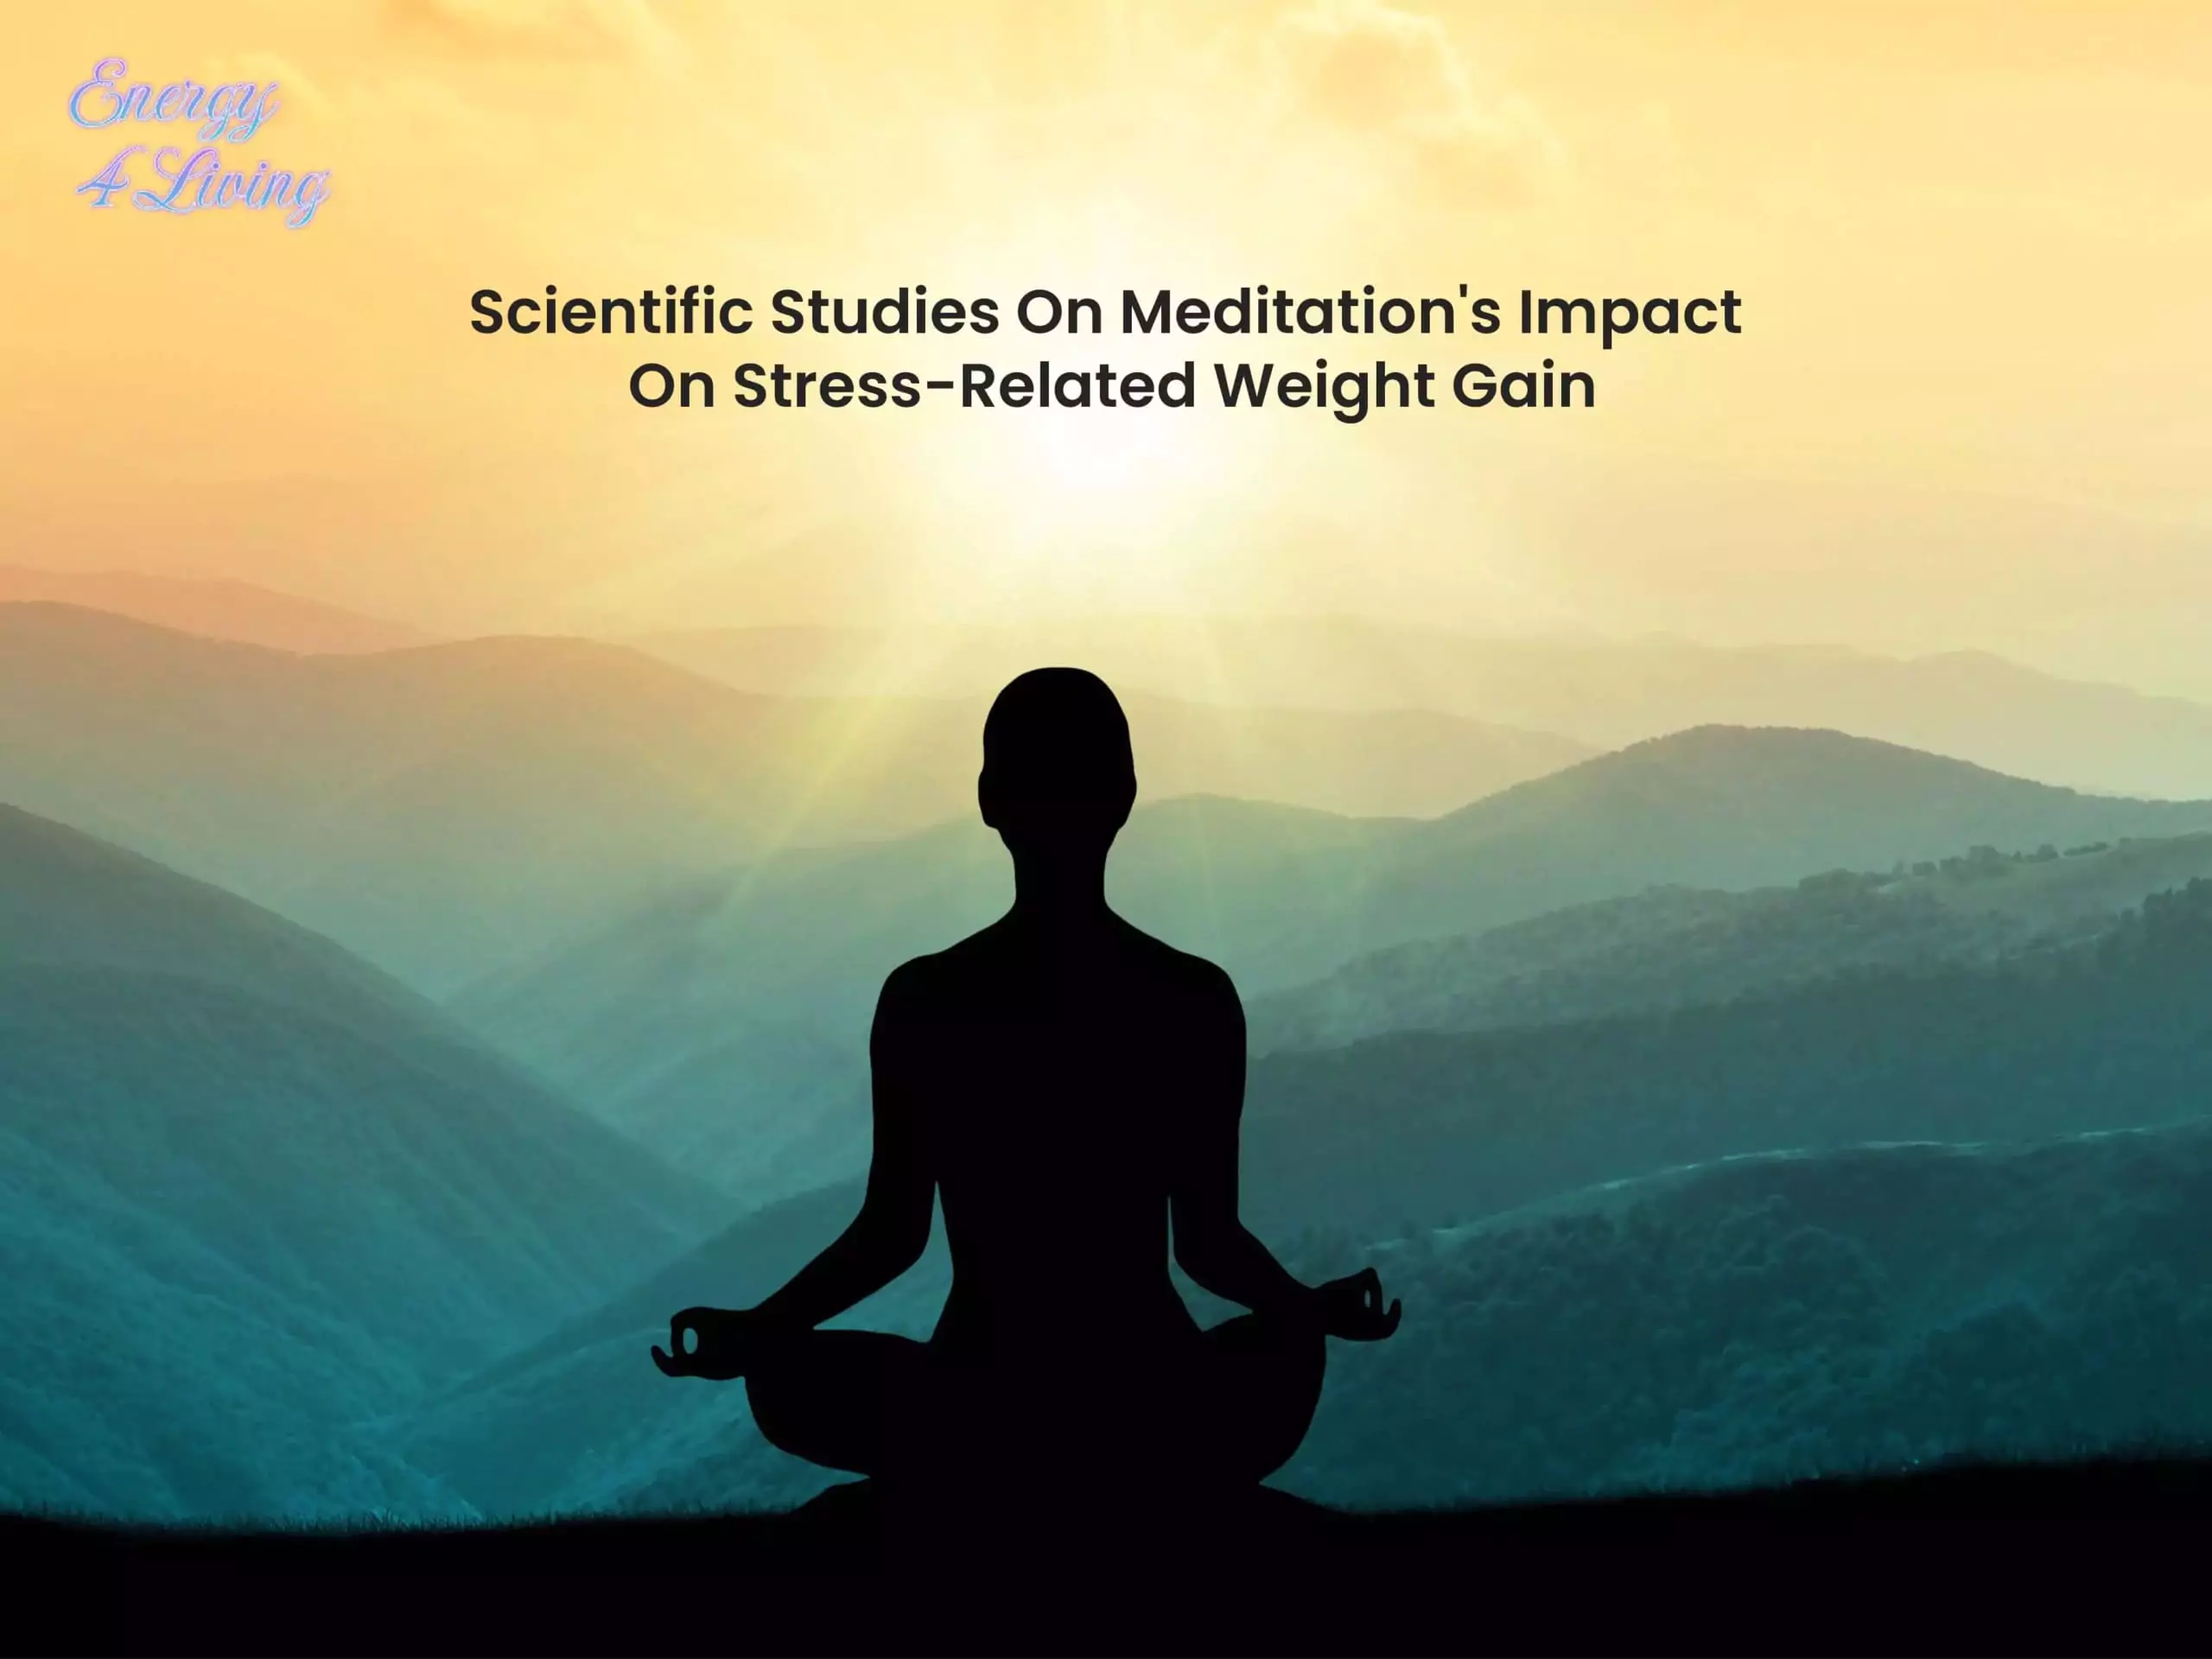 https://energy4living.com.au/the-connection-between-meditation-and-weight-loss/